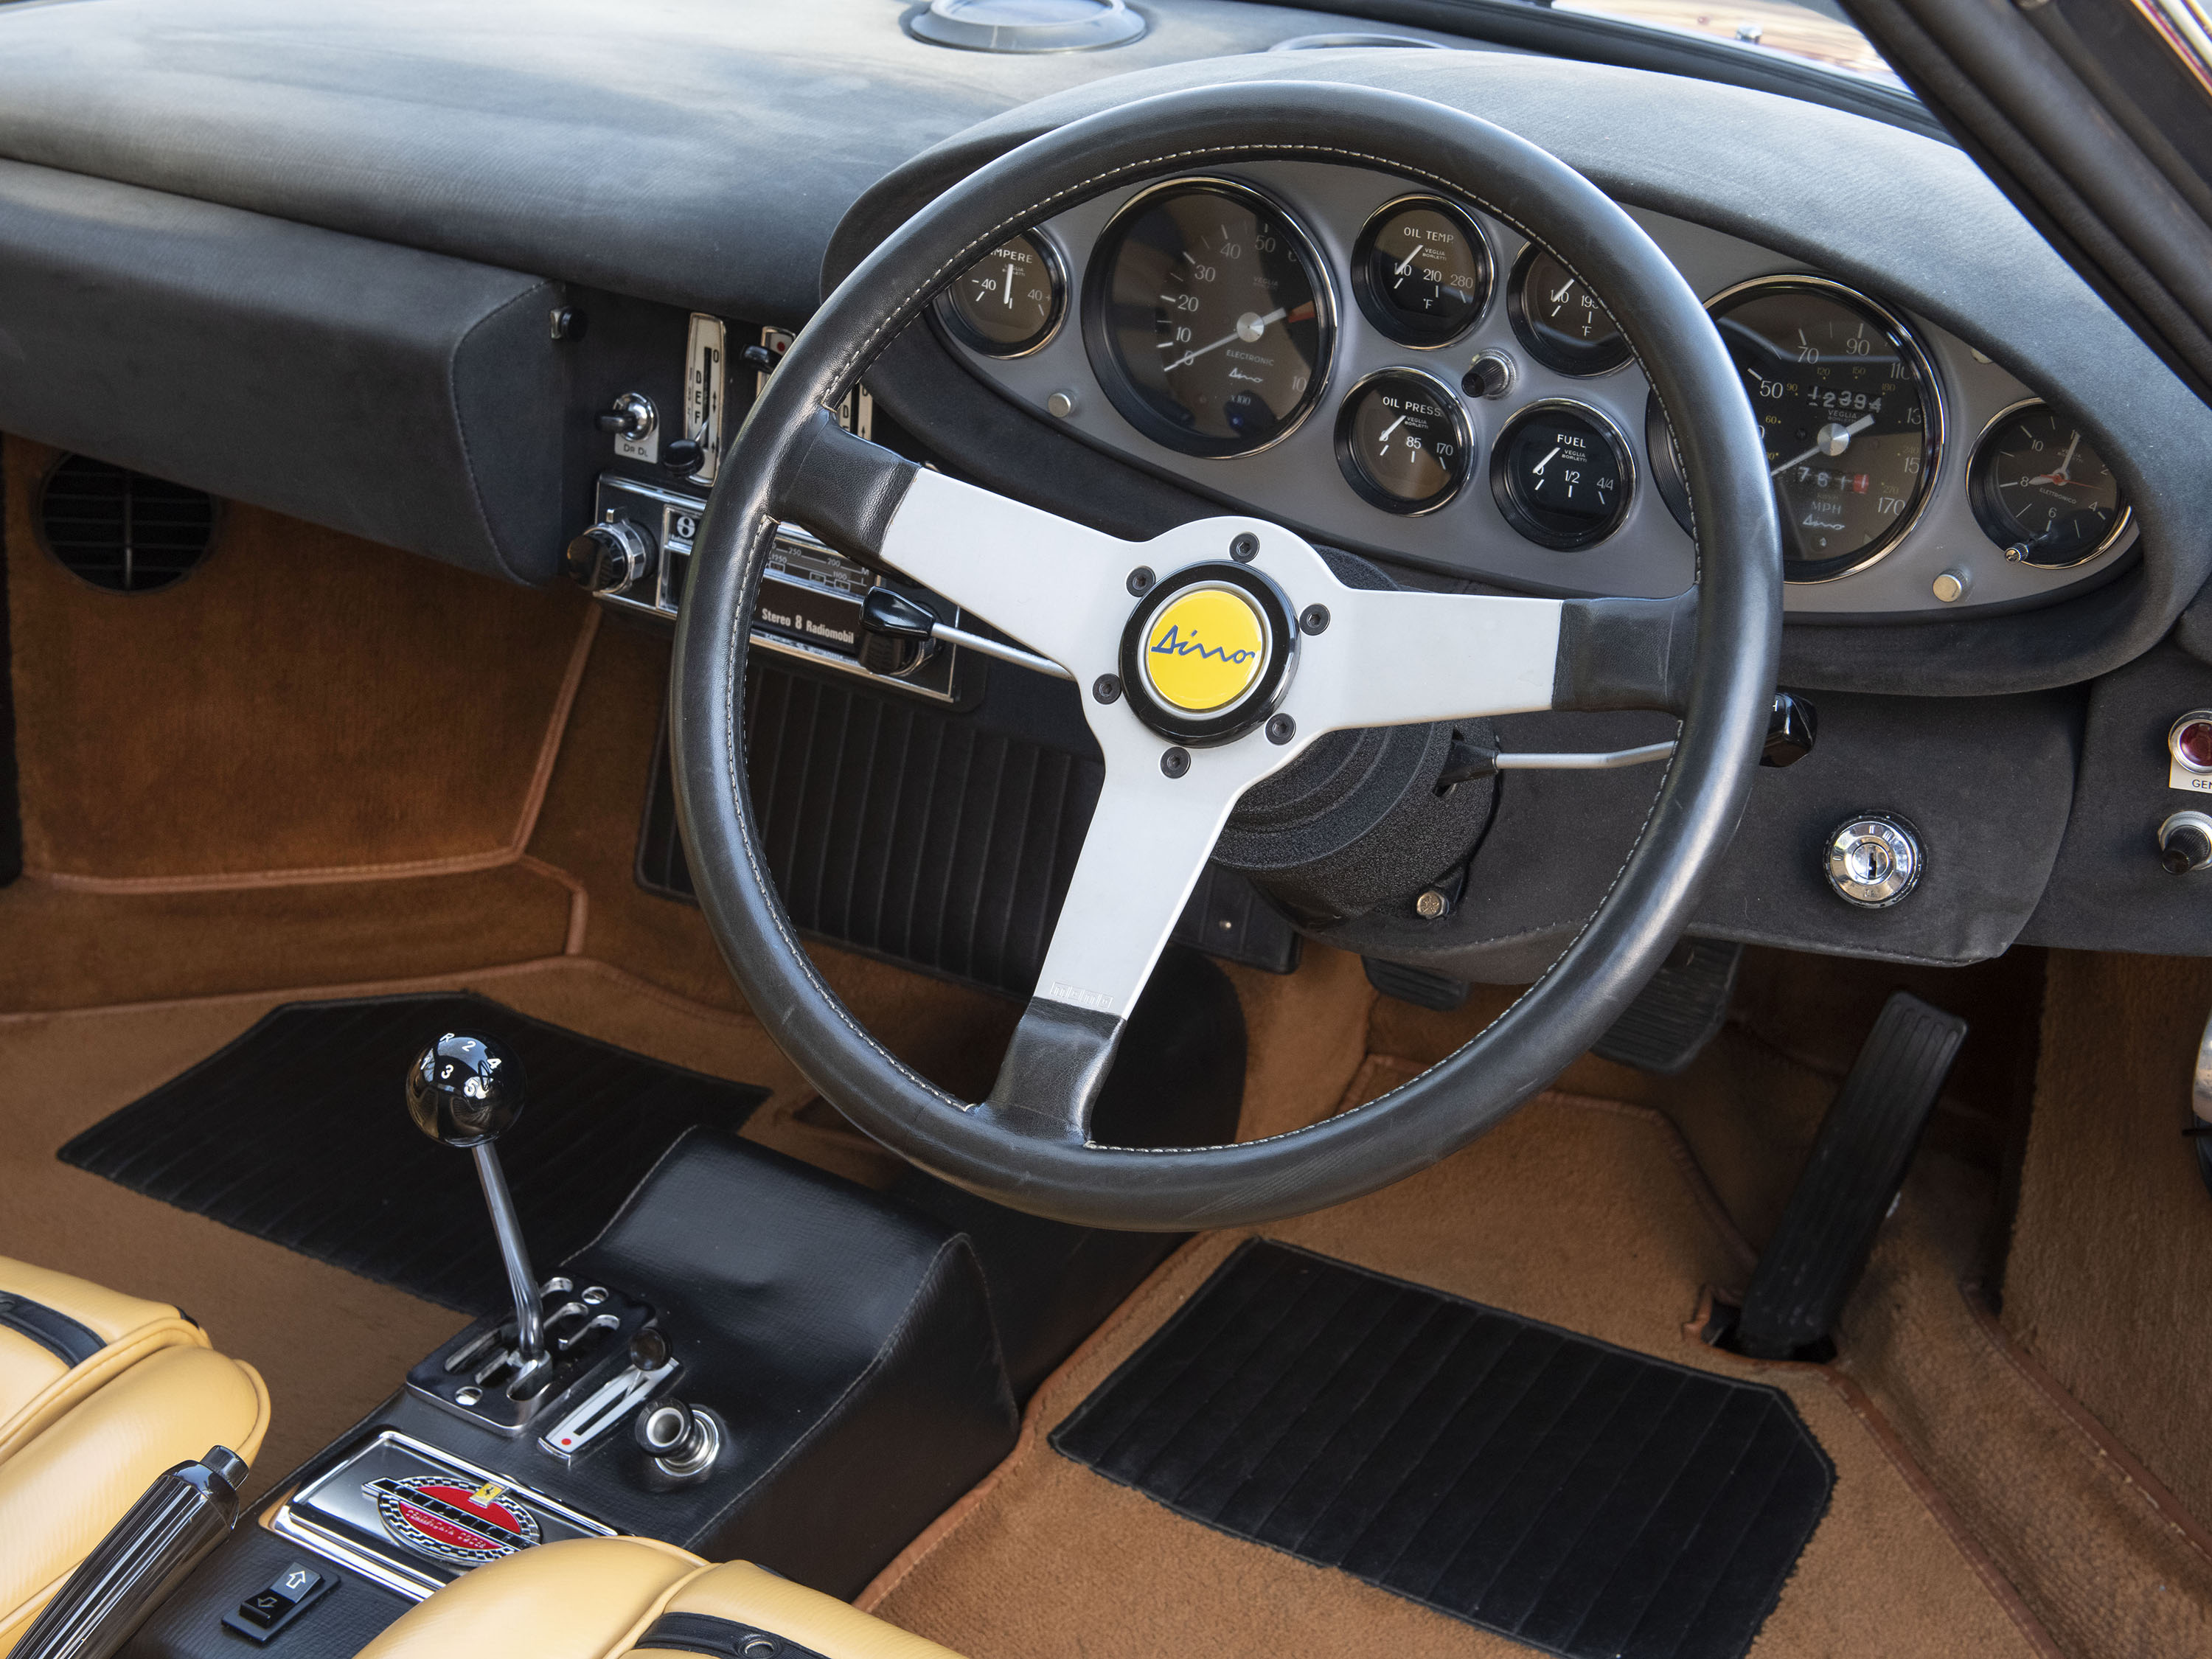 FERRARI DINO 246 GT CHAIRS AND FLARES - 07168 - Tom Hartley Jnr